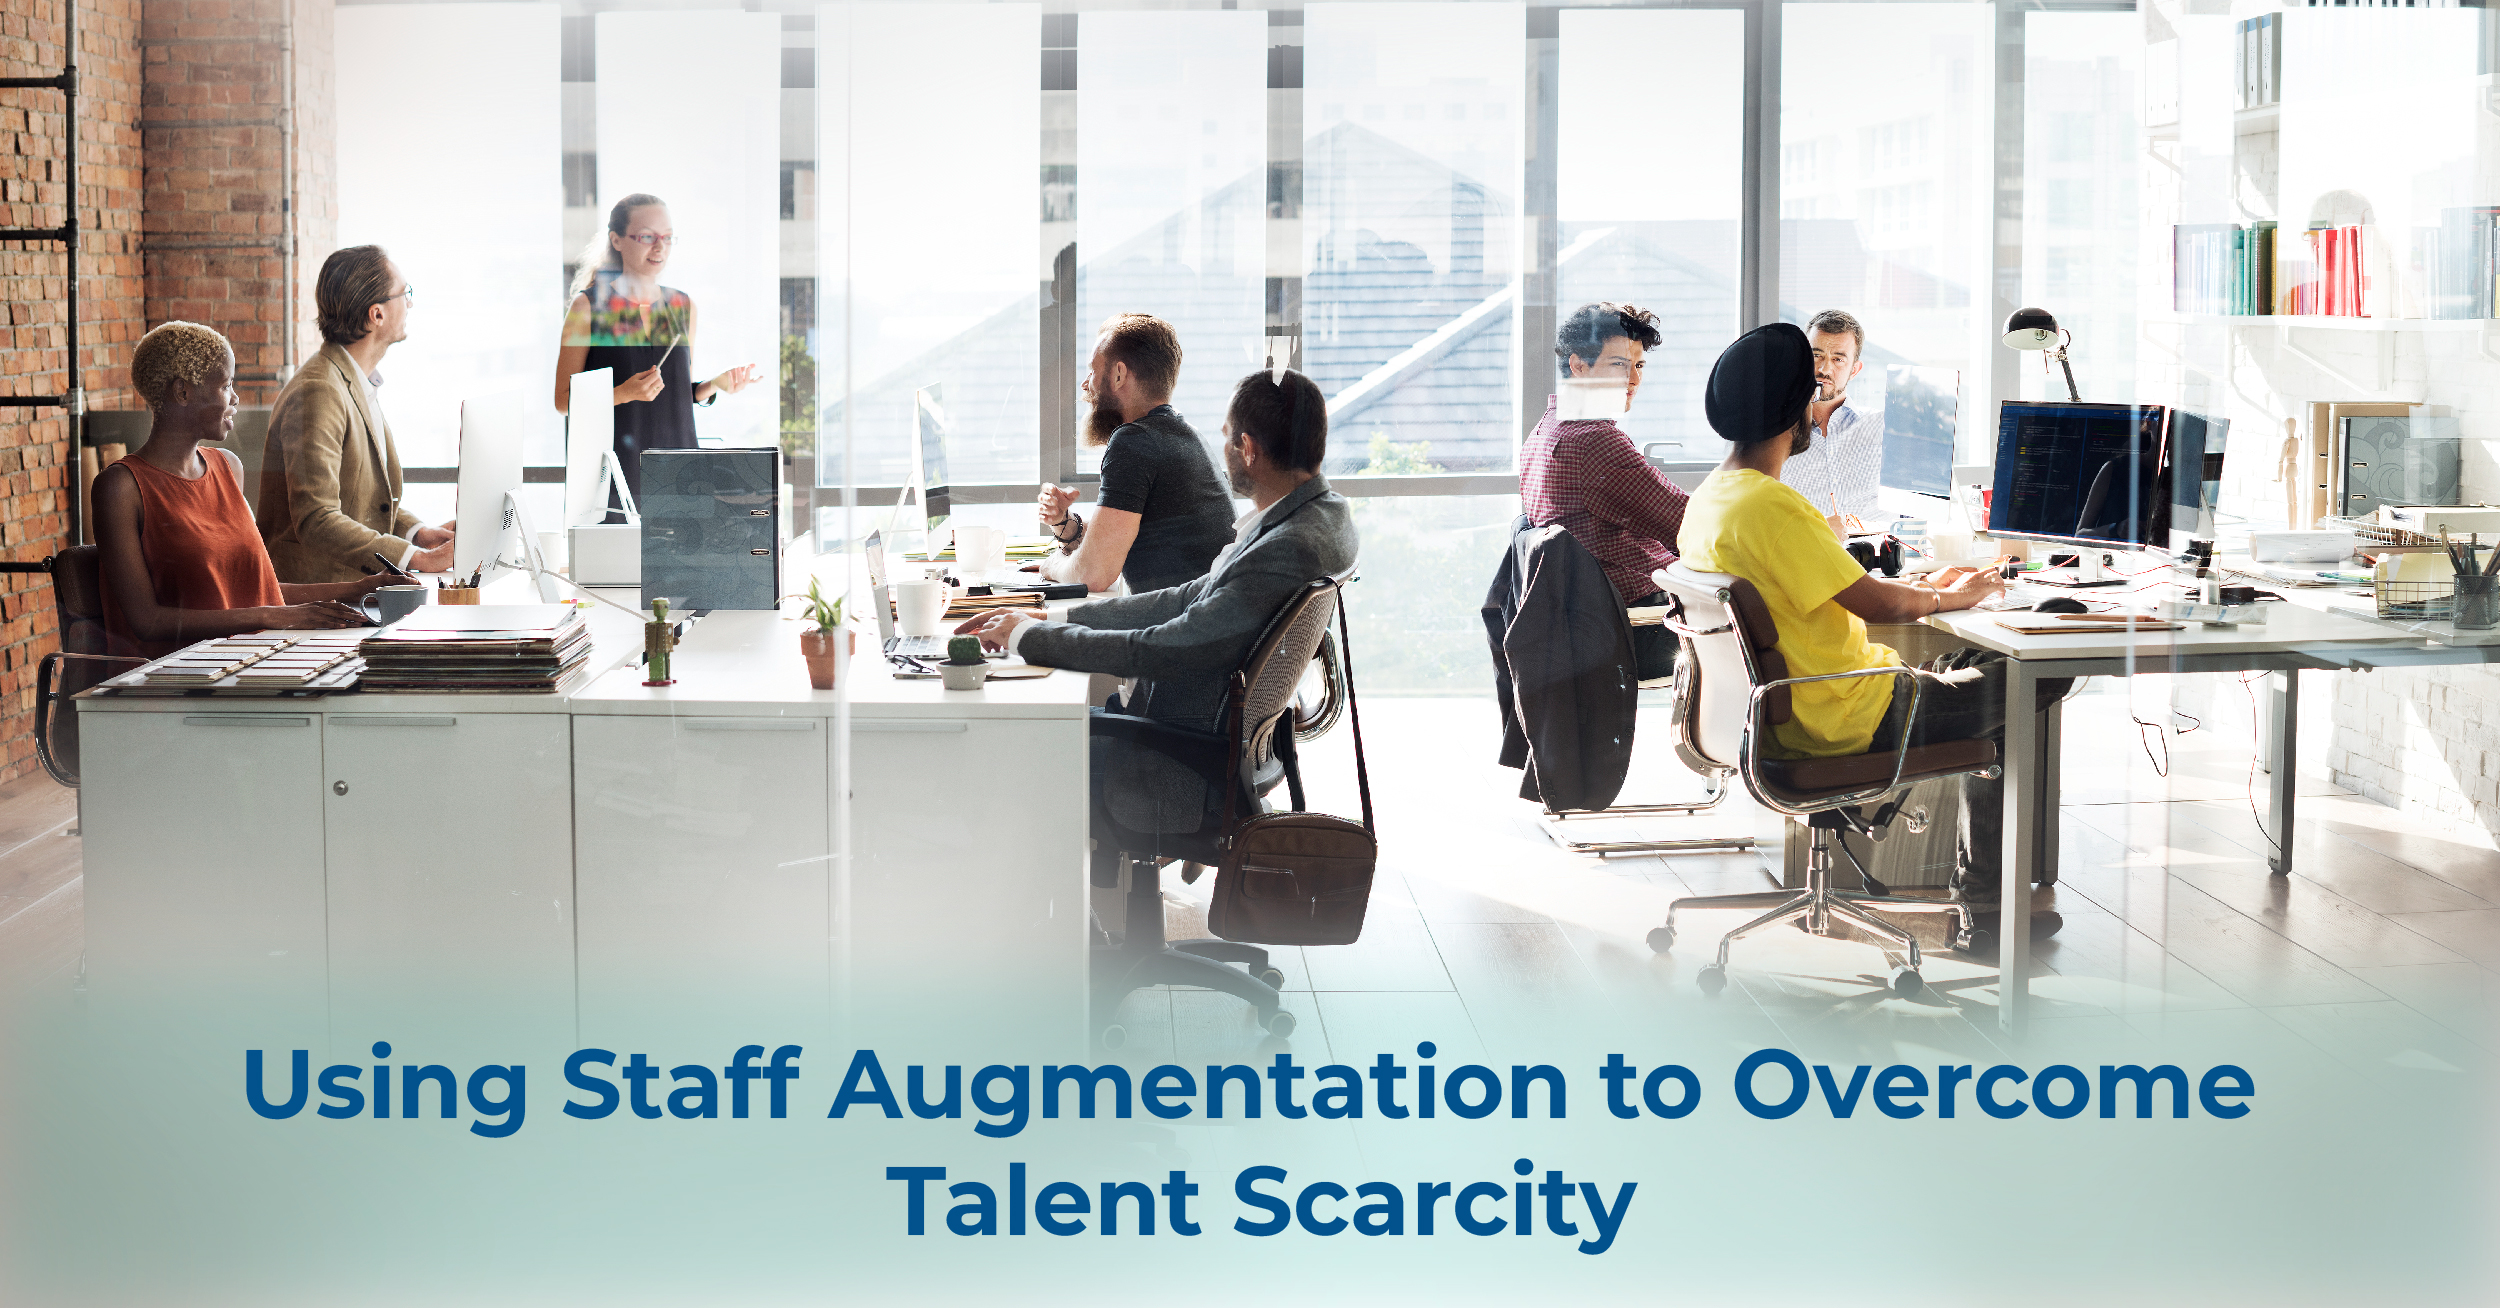 Using Staff Augmentation to Overcome Talent Scarcity